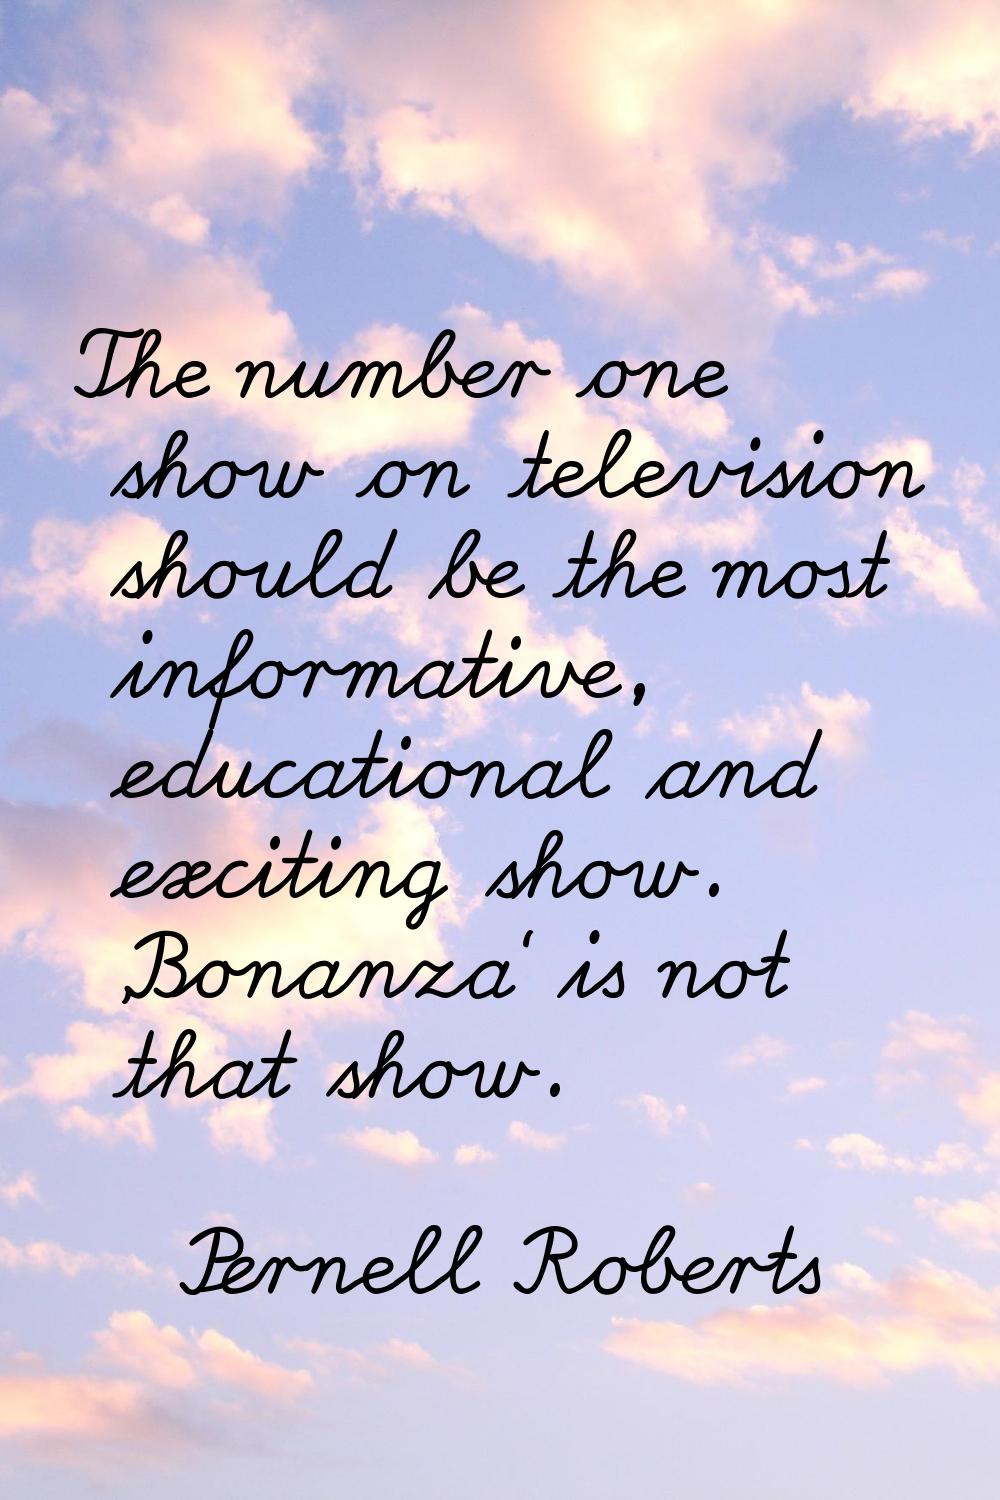 The number one show on television should be the most informative, educational and exciting show. 'B